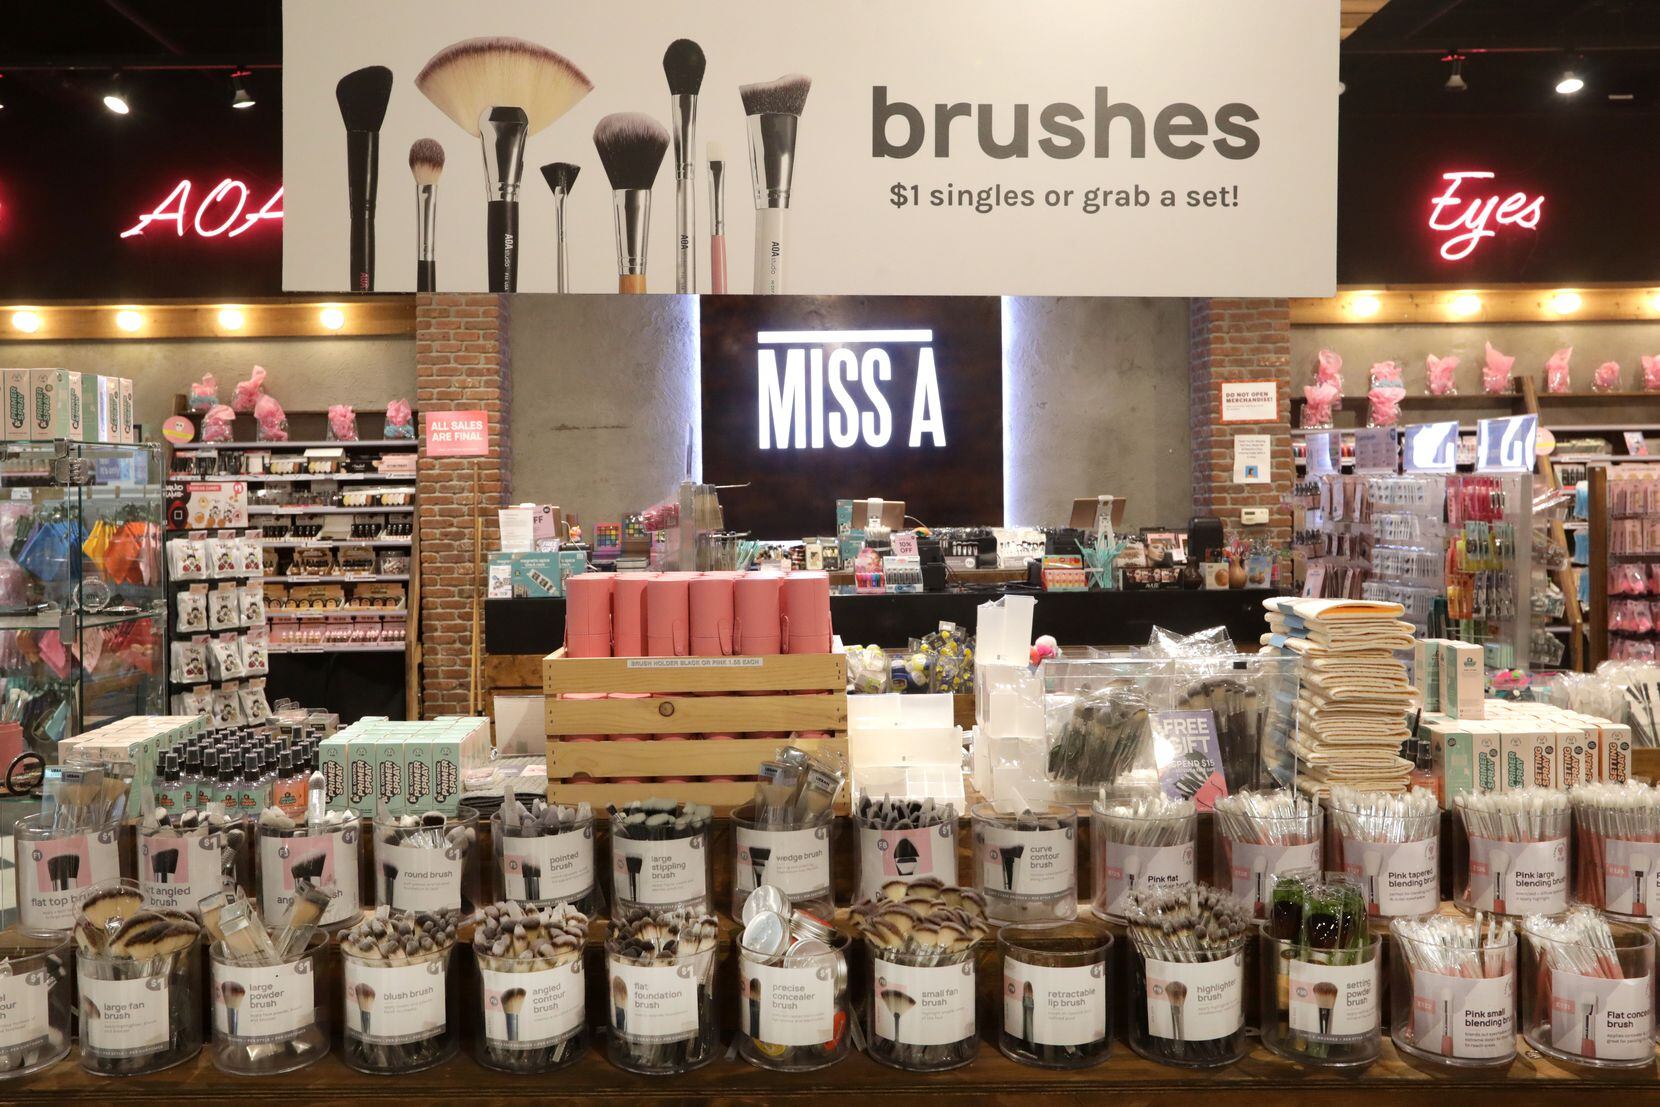 Dallas-based beauty retailer Miss A is taking its $1 prices to more